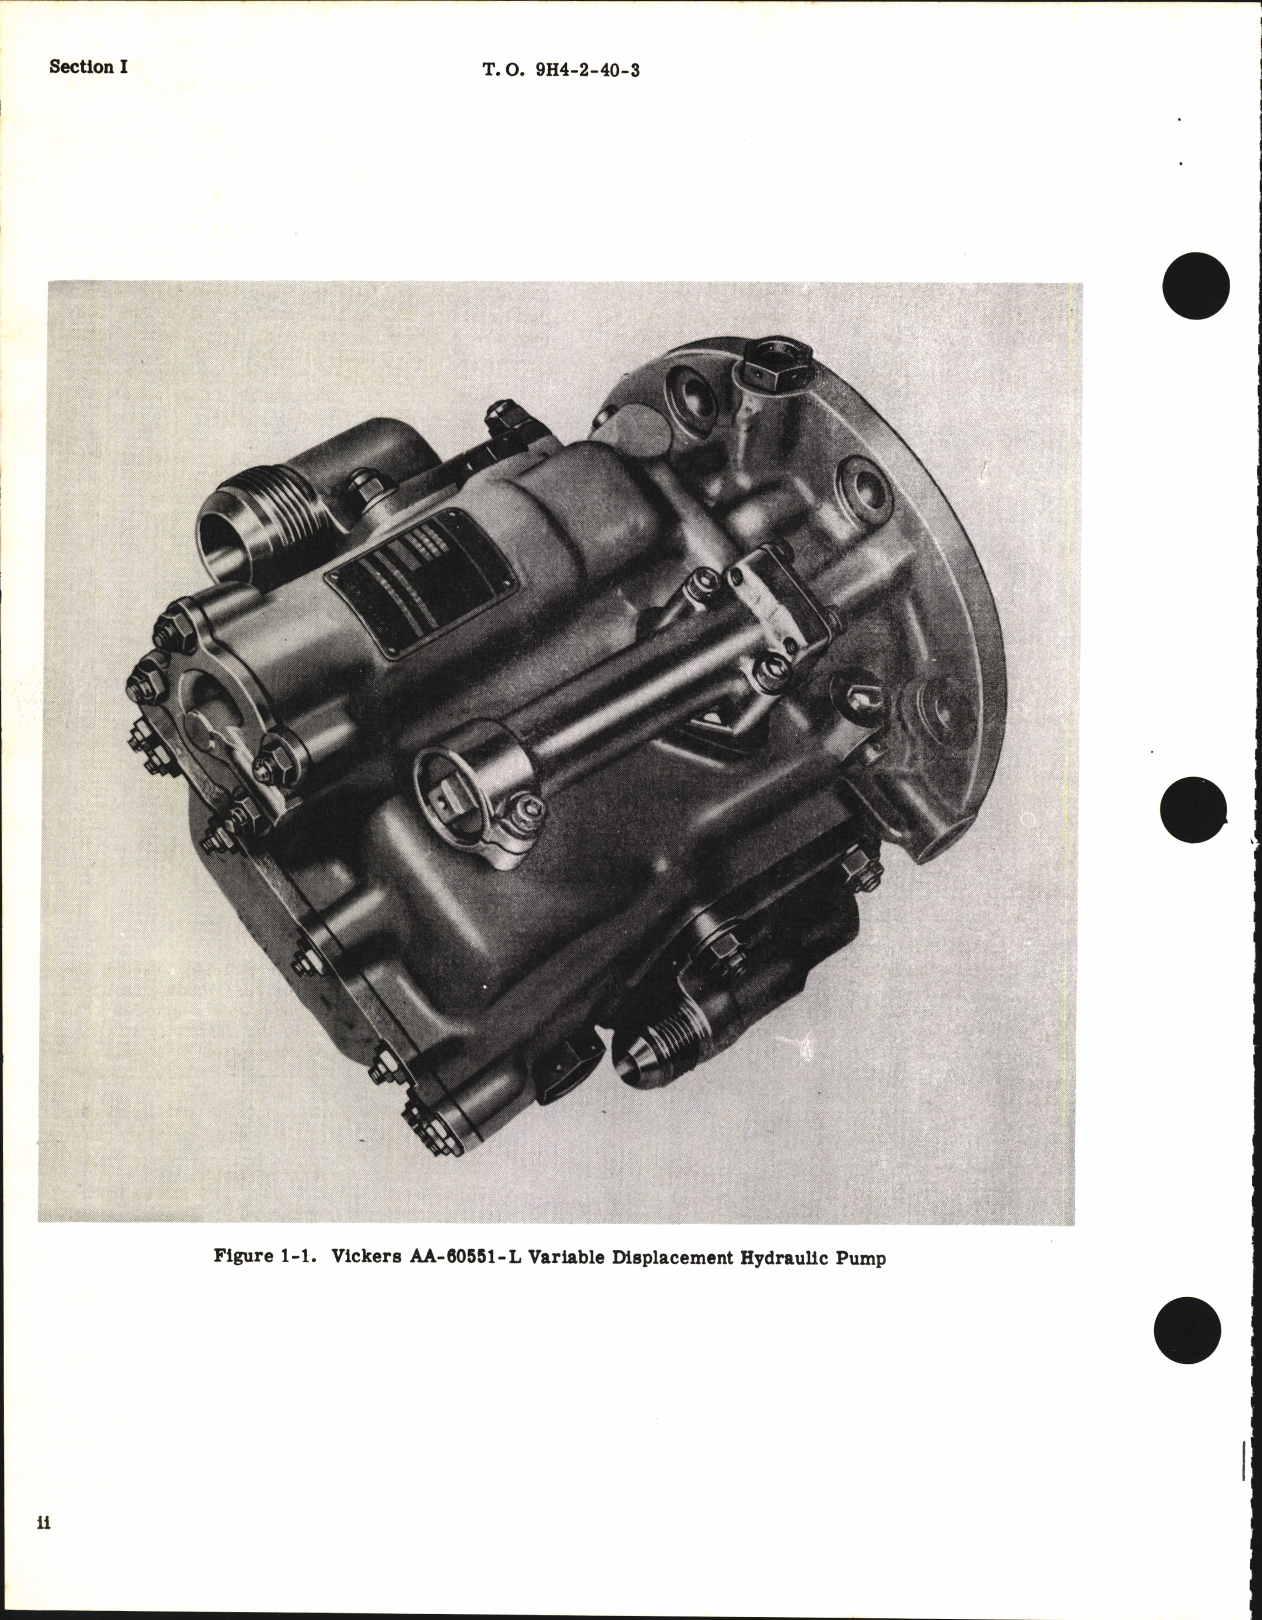 Sample page 4 from AirCorps Library document: Overhaul Instructions for Variable Displacement Hydraulic Pumps AA-60550-L Series